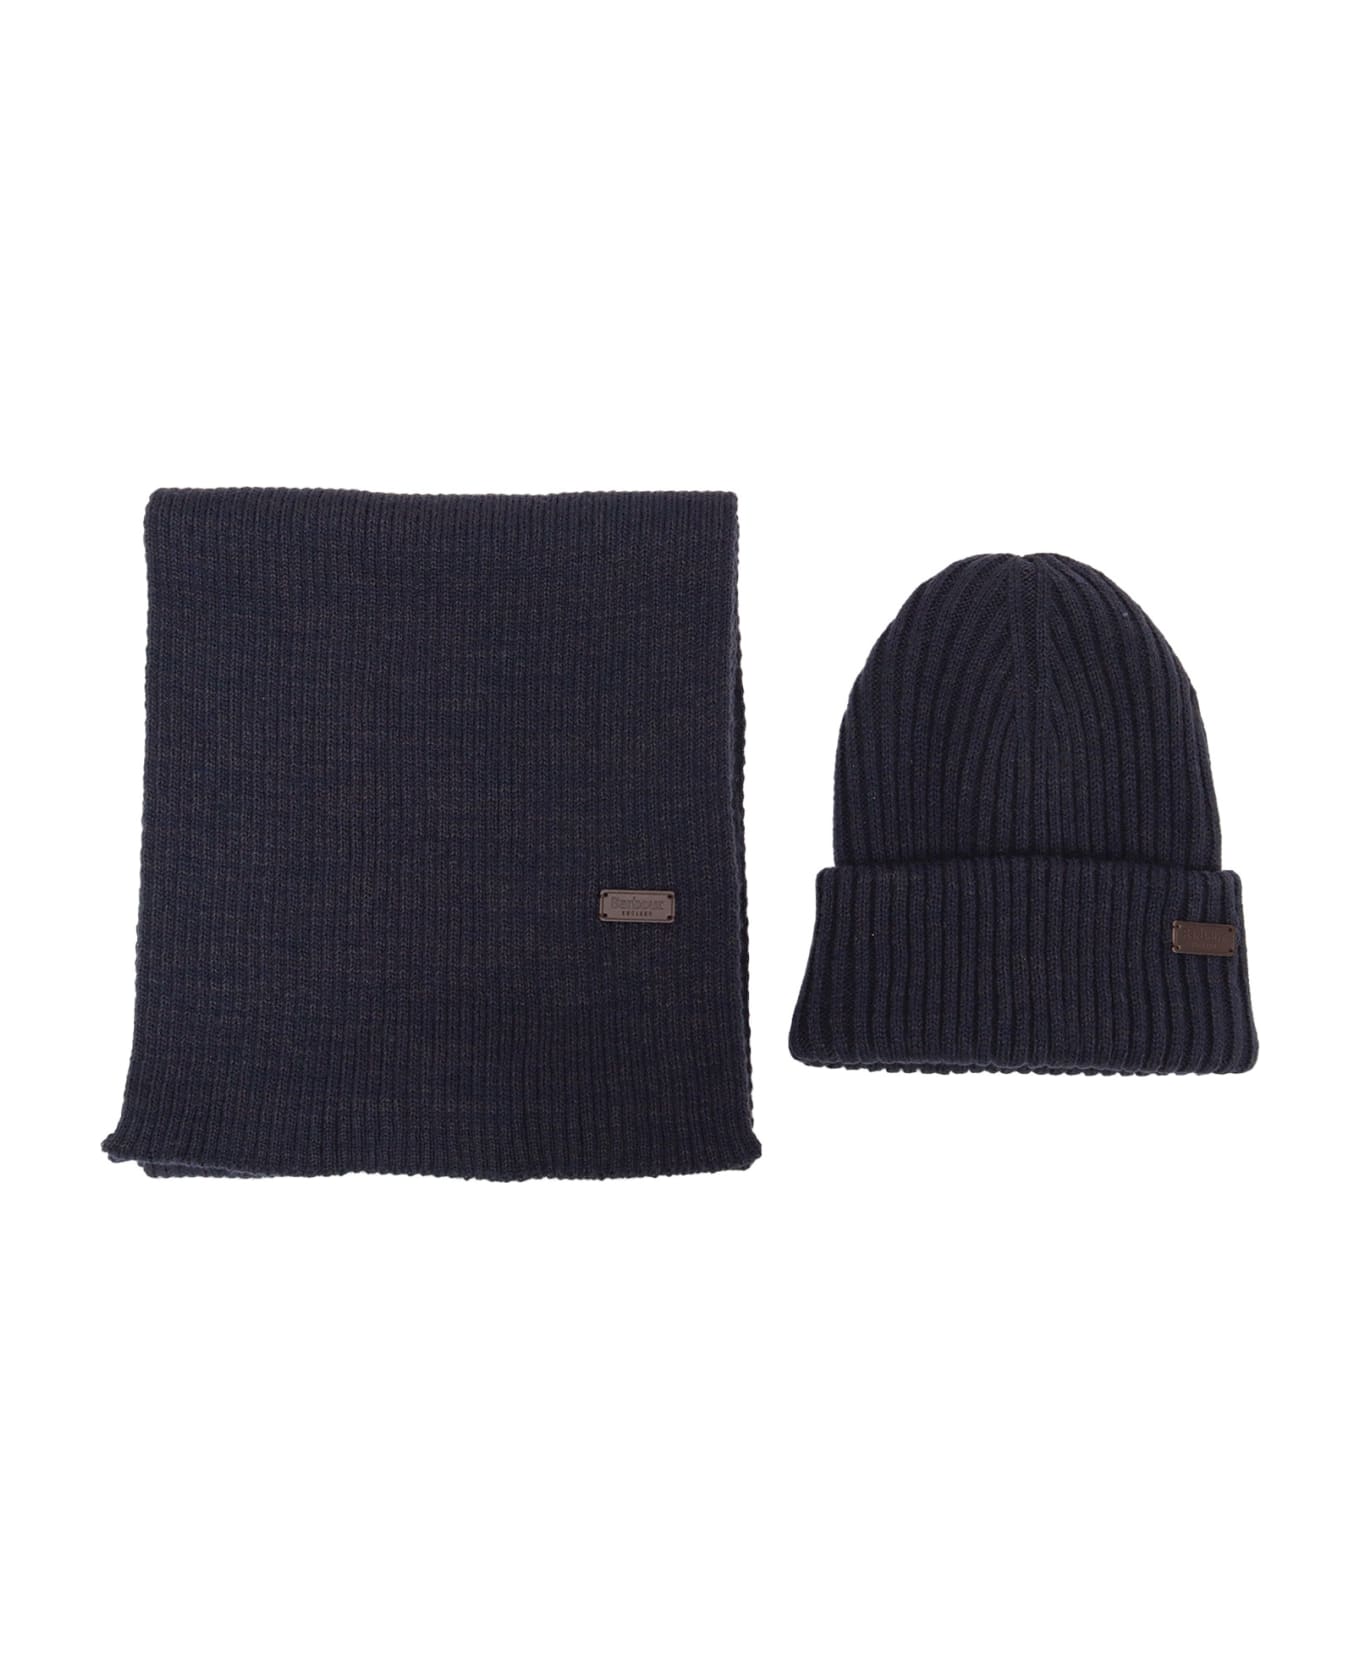 Barbour Scarf And Beanie Set - BLUE スカーフ